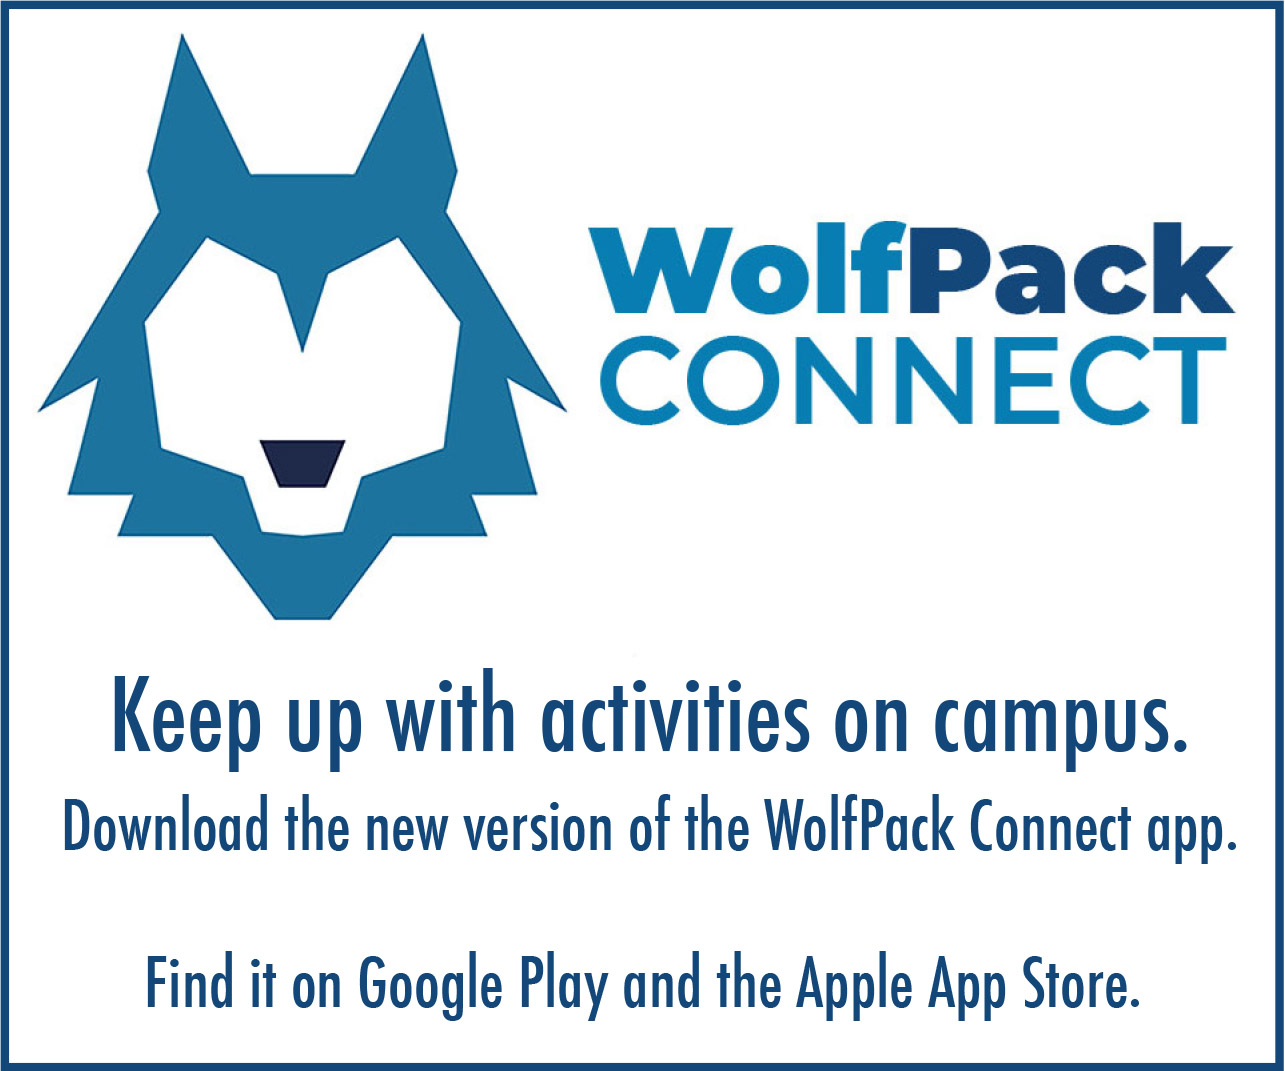 Keep up with activities on campus. Download the new version of the WolfPack Connect App.